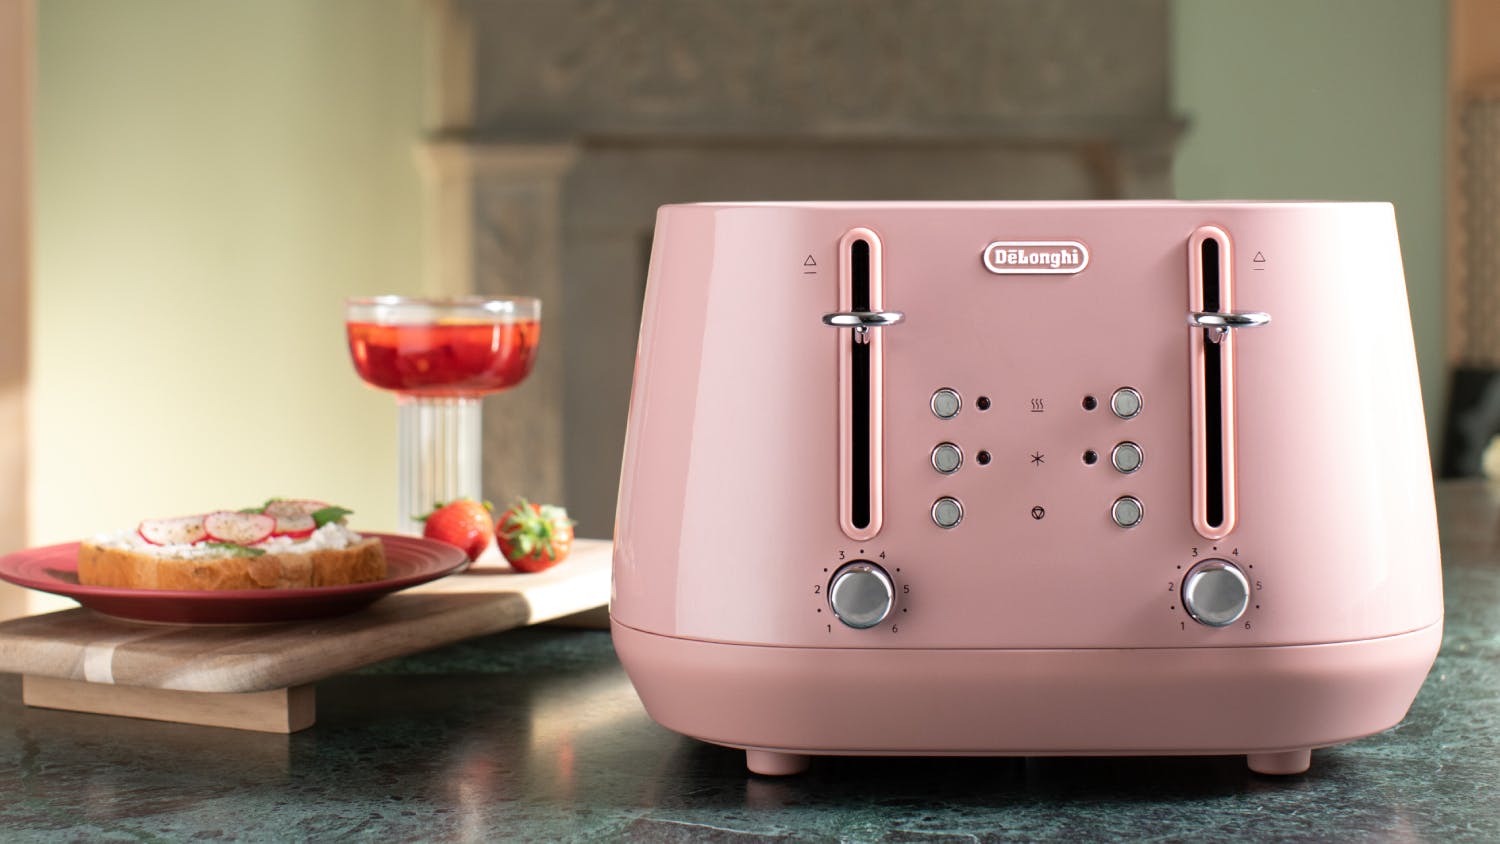 DeLonghi Eclettica 4 Slice Toaster - Playful Pink (CTY4003.PK)